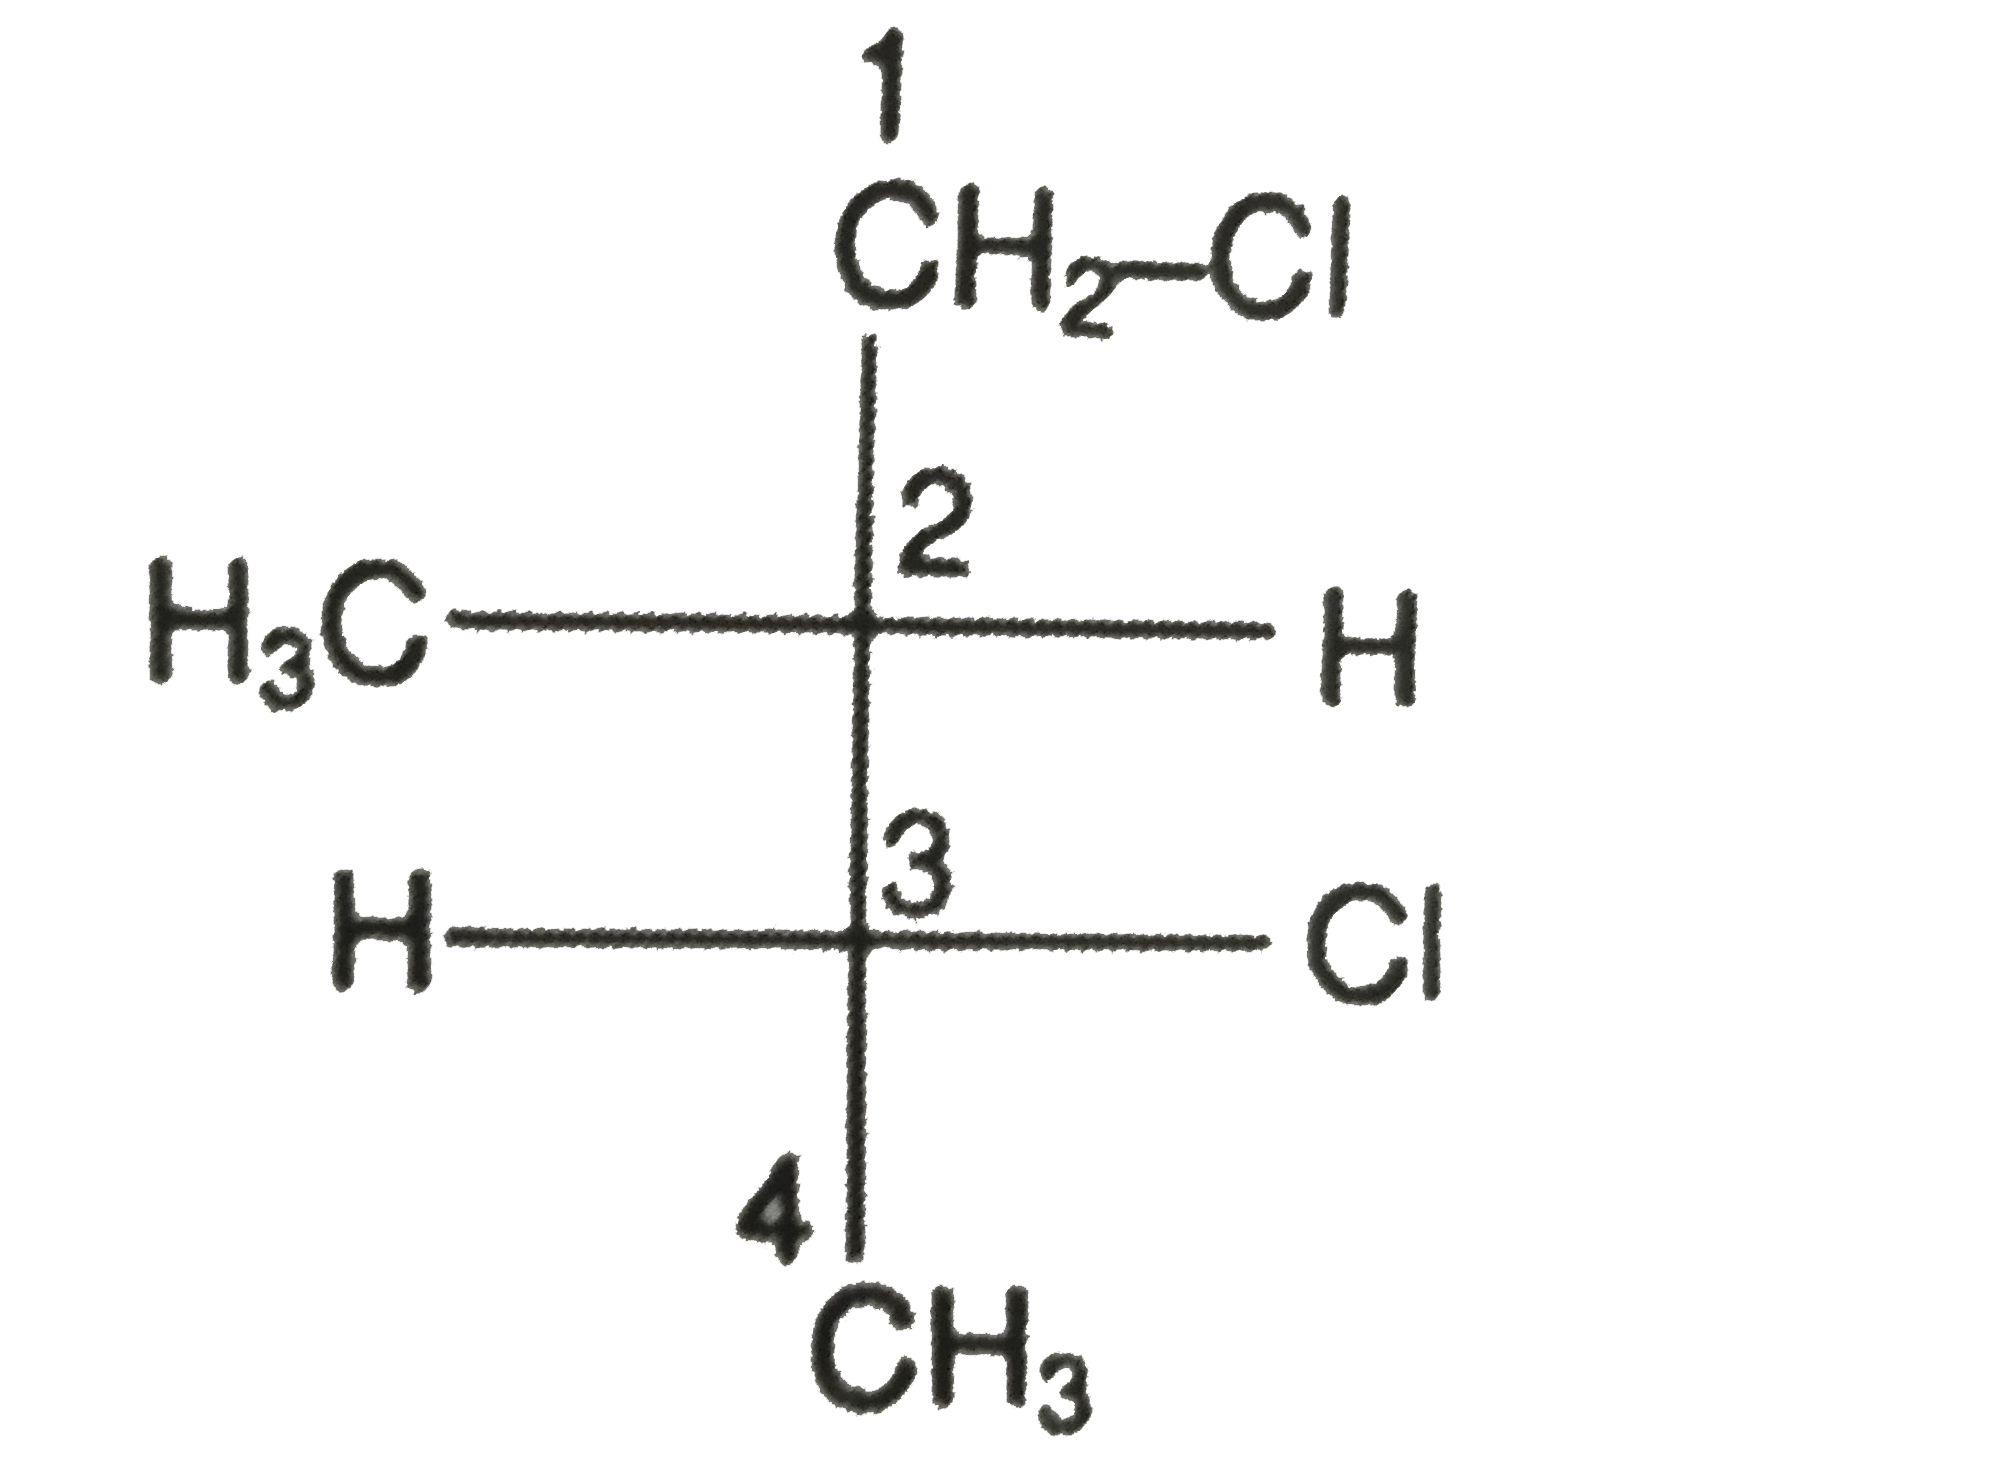 The R/S designation for the following stereoisomers of 1,3-dichloro-2-methylbutane is :